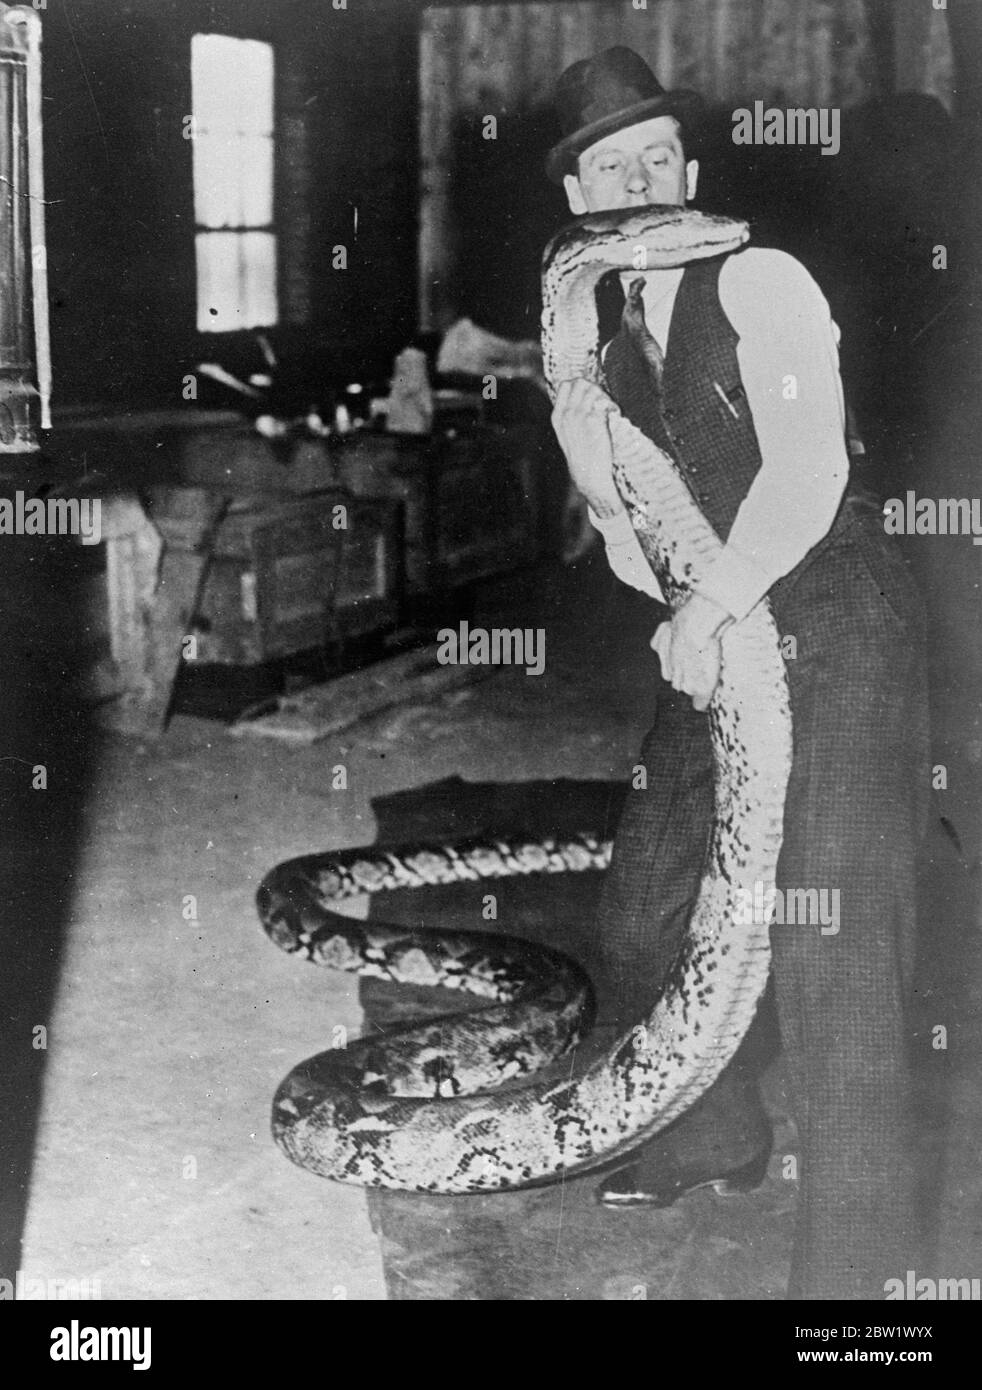 Whiskey jobs at eight strong men, forcibly feeding a 26 foot python 8 strong men were required to forcibly feed a 26 foot python when it was brought from its winter quarters at Hamilton, Ontario. It cannot eat during the three months before and his first meal consisted of 20 pounds of hamburger, two dozen acres, a quart of six citrate of magnosia, and a quart of olive oil. 200 years old, snake weighs 380 pounds. Two seconds. Photo shows, Owen Dauphinee, the keeper, fondles his 26 foot python before beginning the risky job of forcibly feeding the Python. Stock Photo